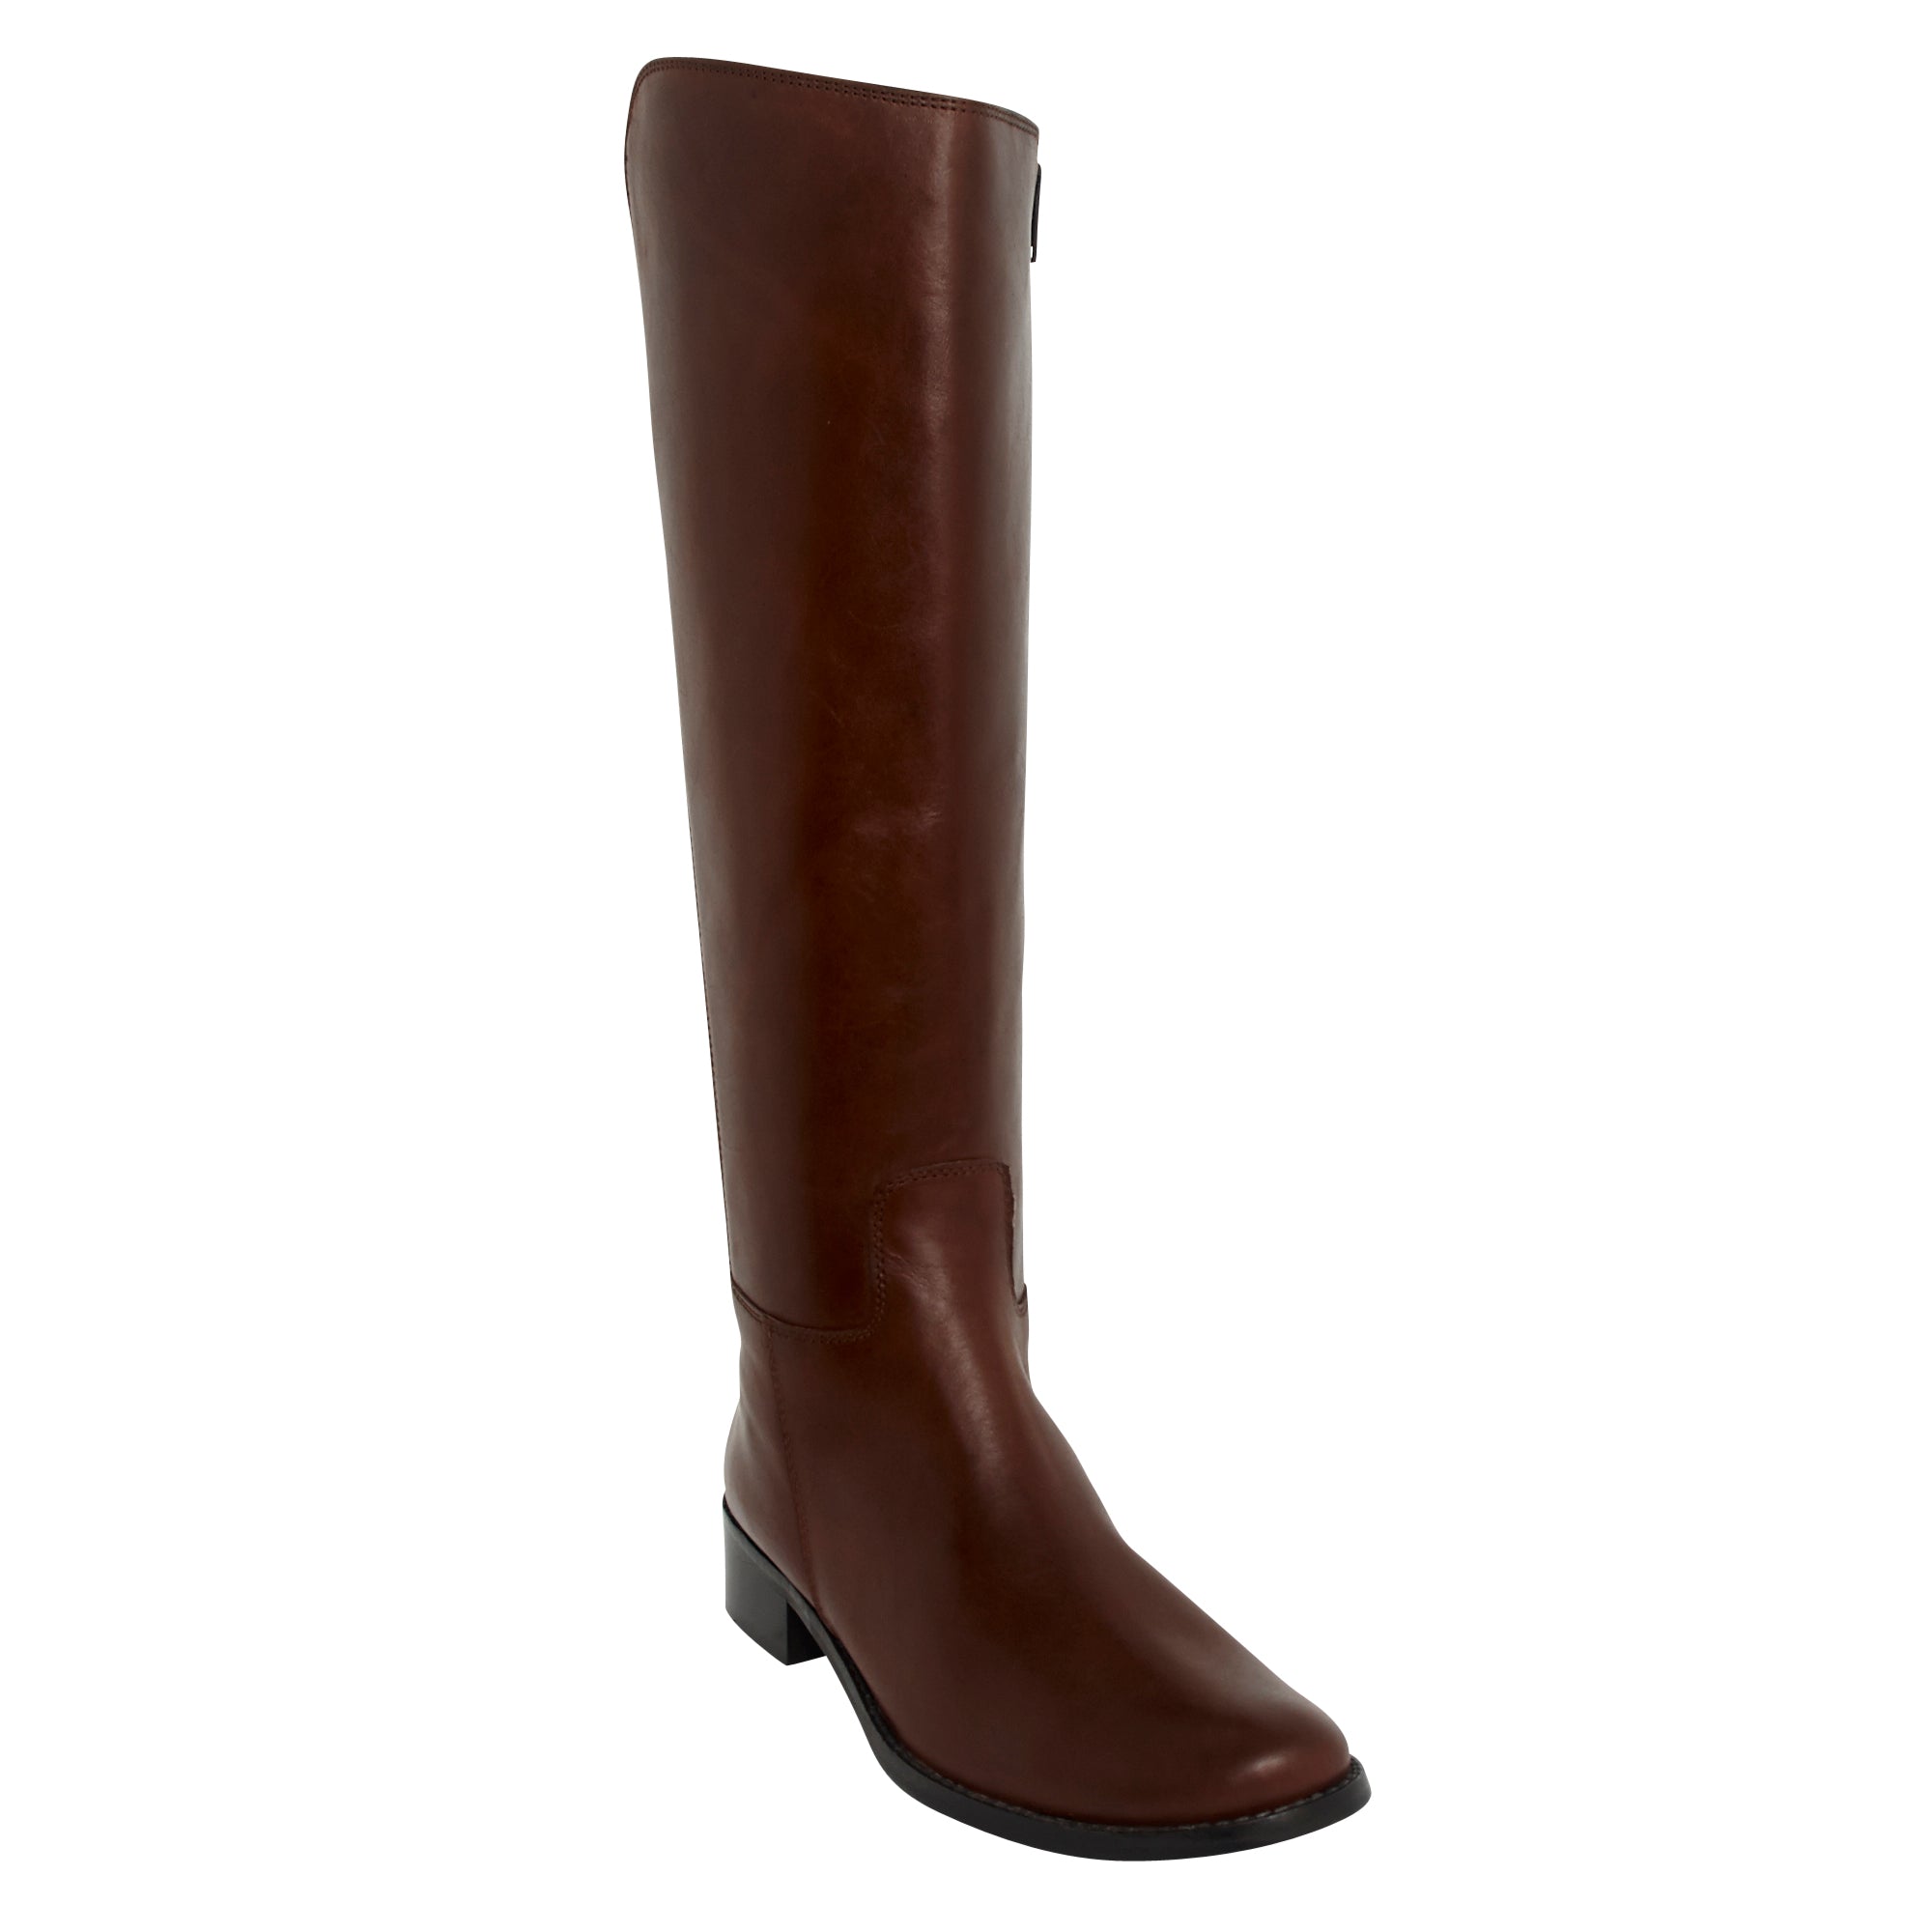 Ladies Long Boots - 32956 brown